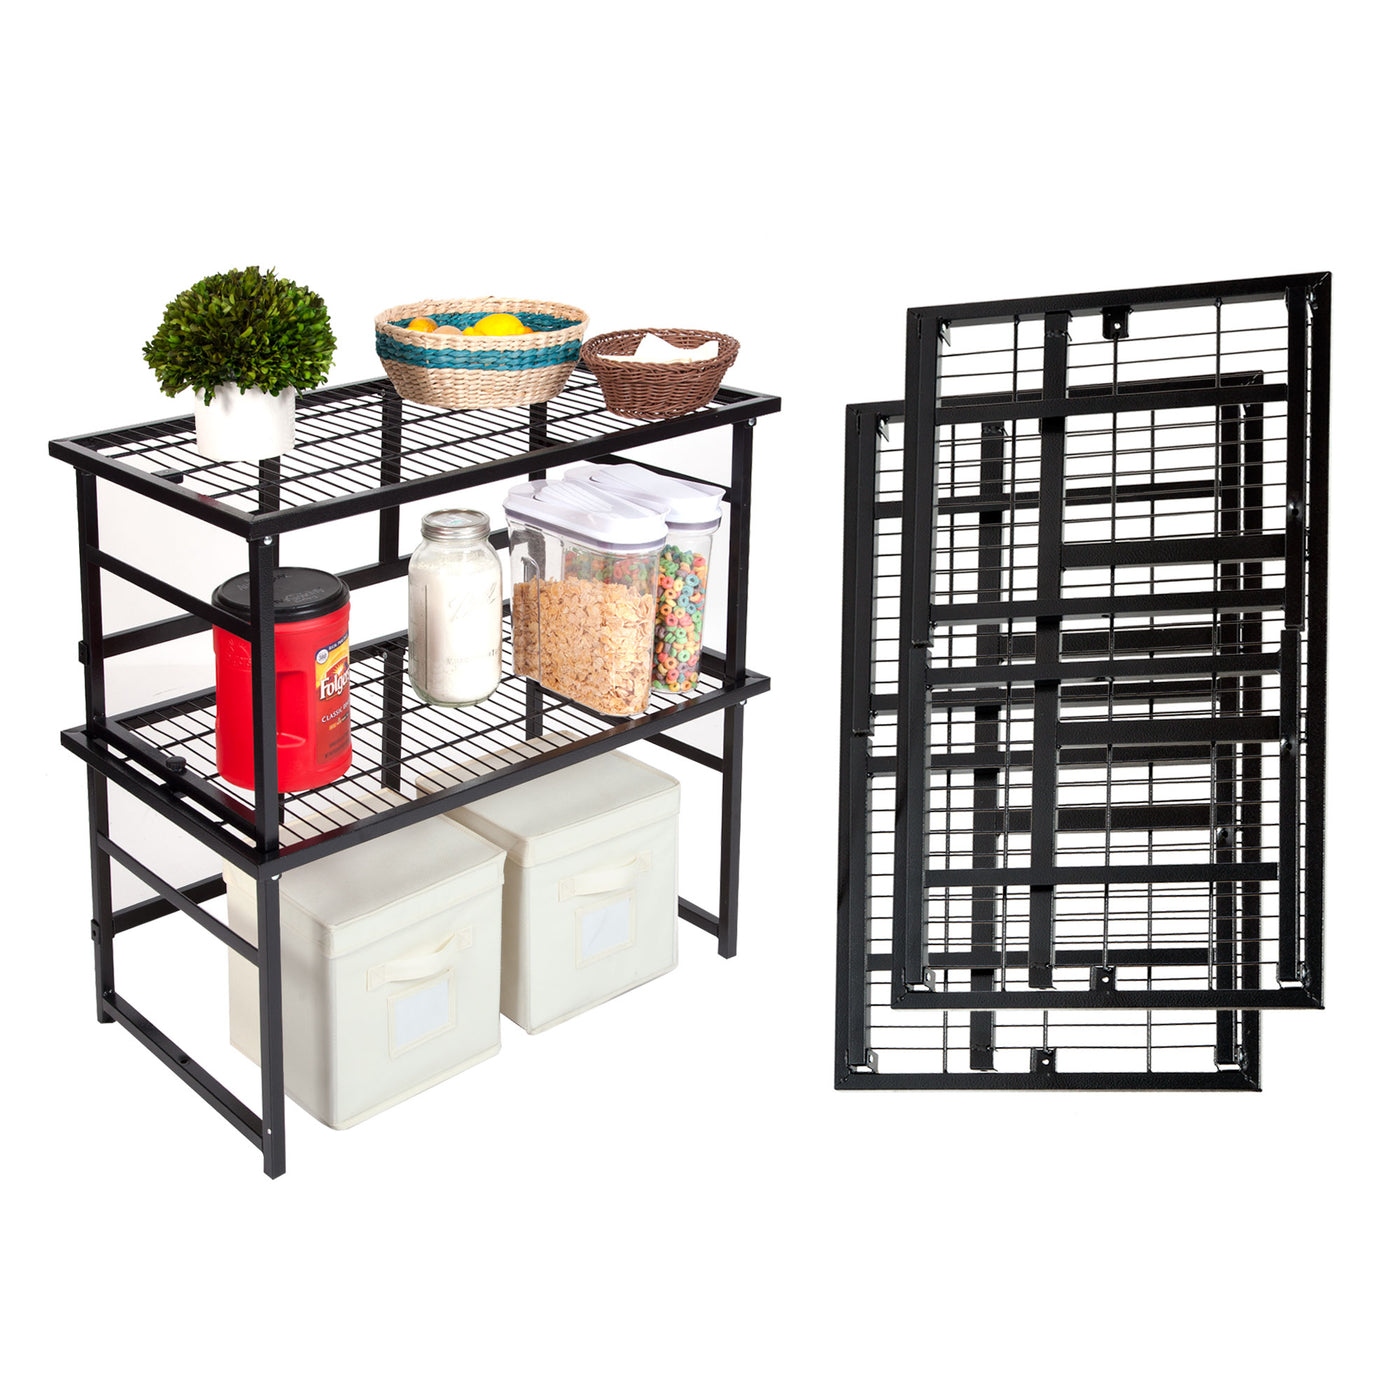 Origami R1 Stackable Storage Shelf, Collapsible/Foldable Steel Stackable Shelves Holds Up to 150 Pounds (Per Rack), Modular Heavy Duty Garage